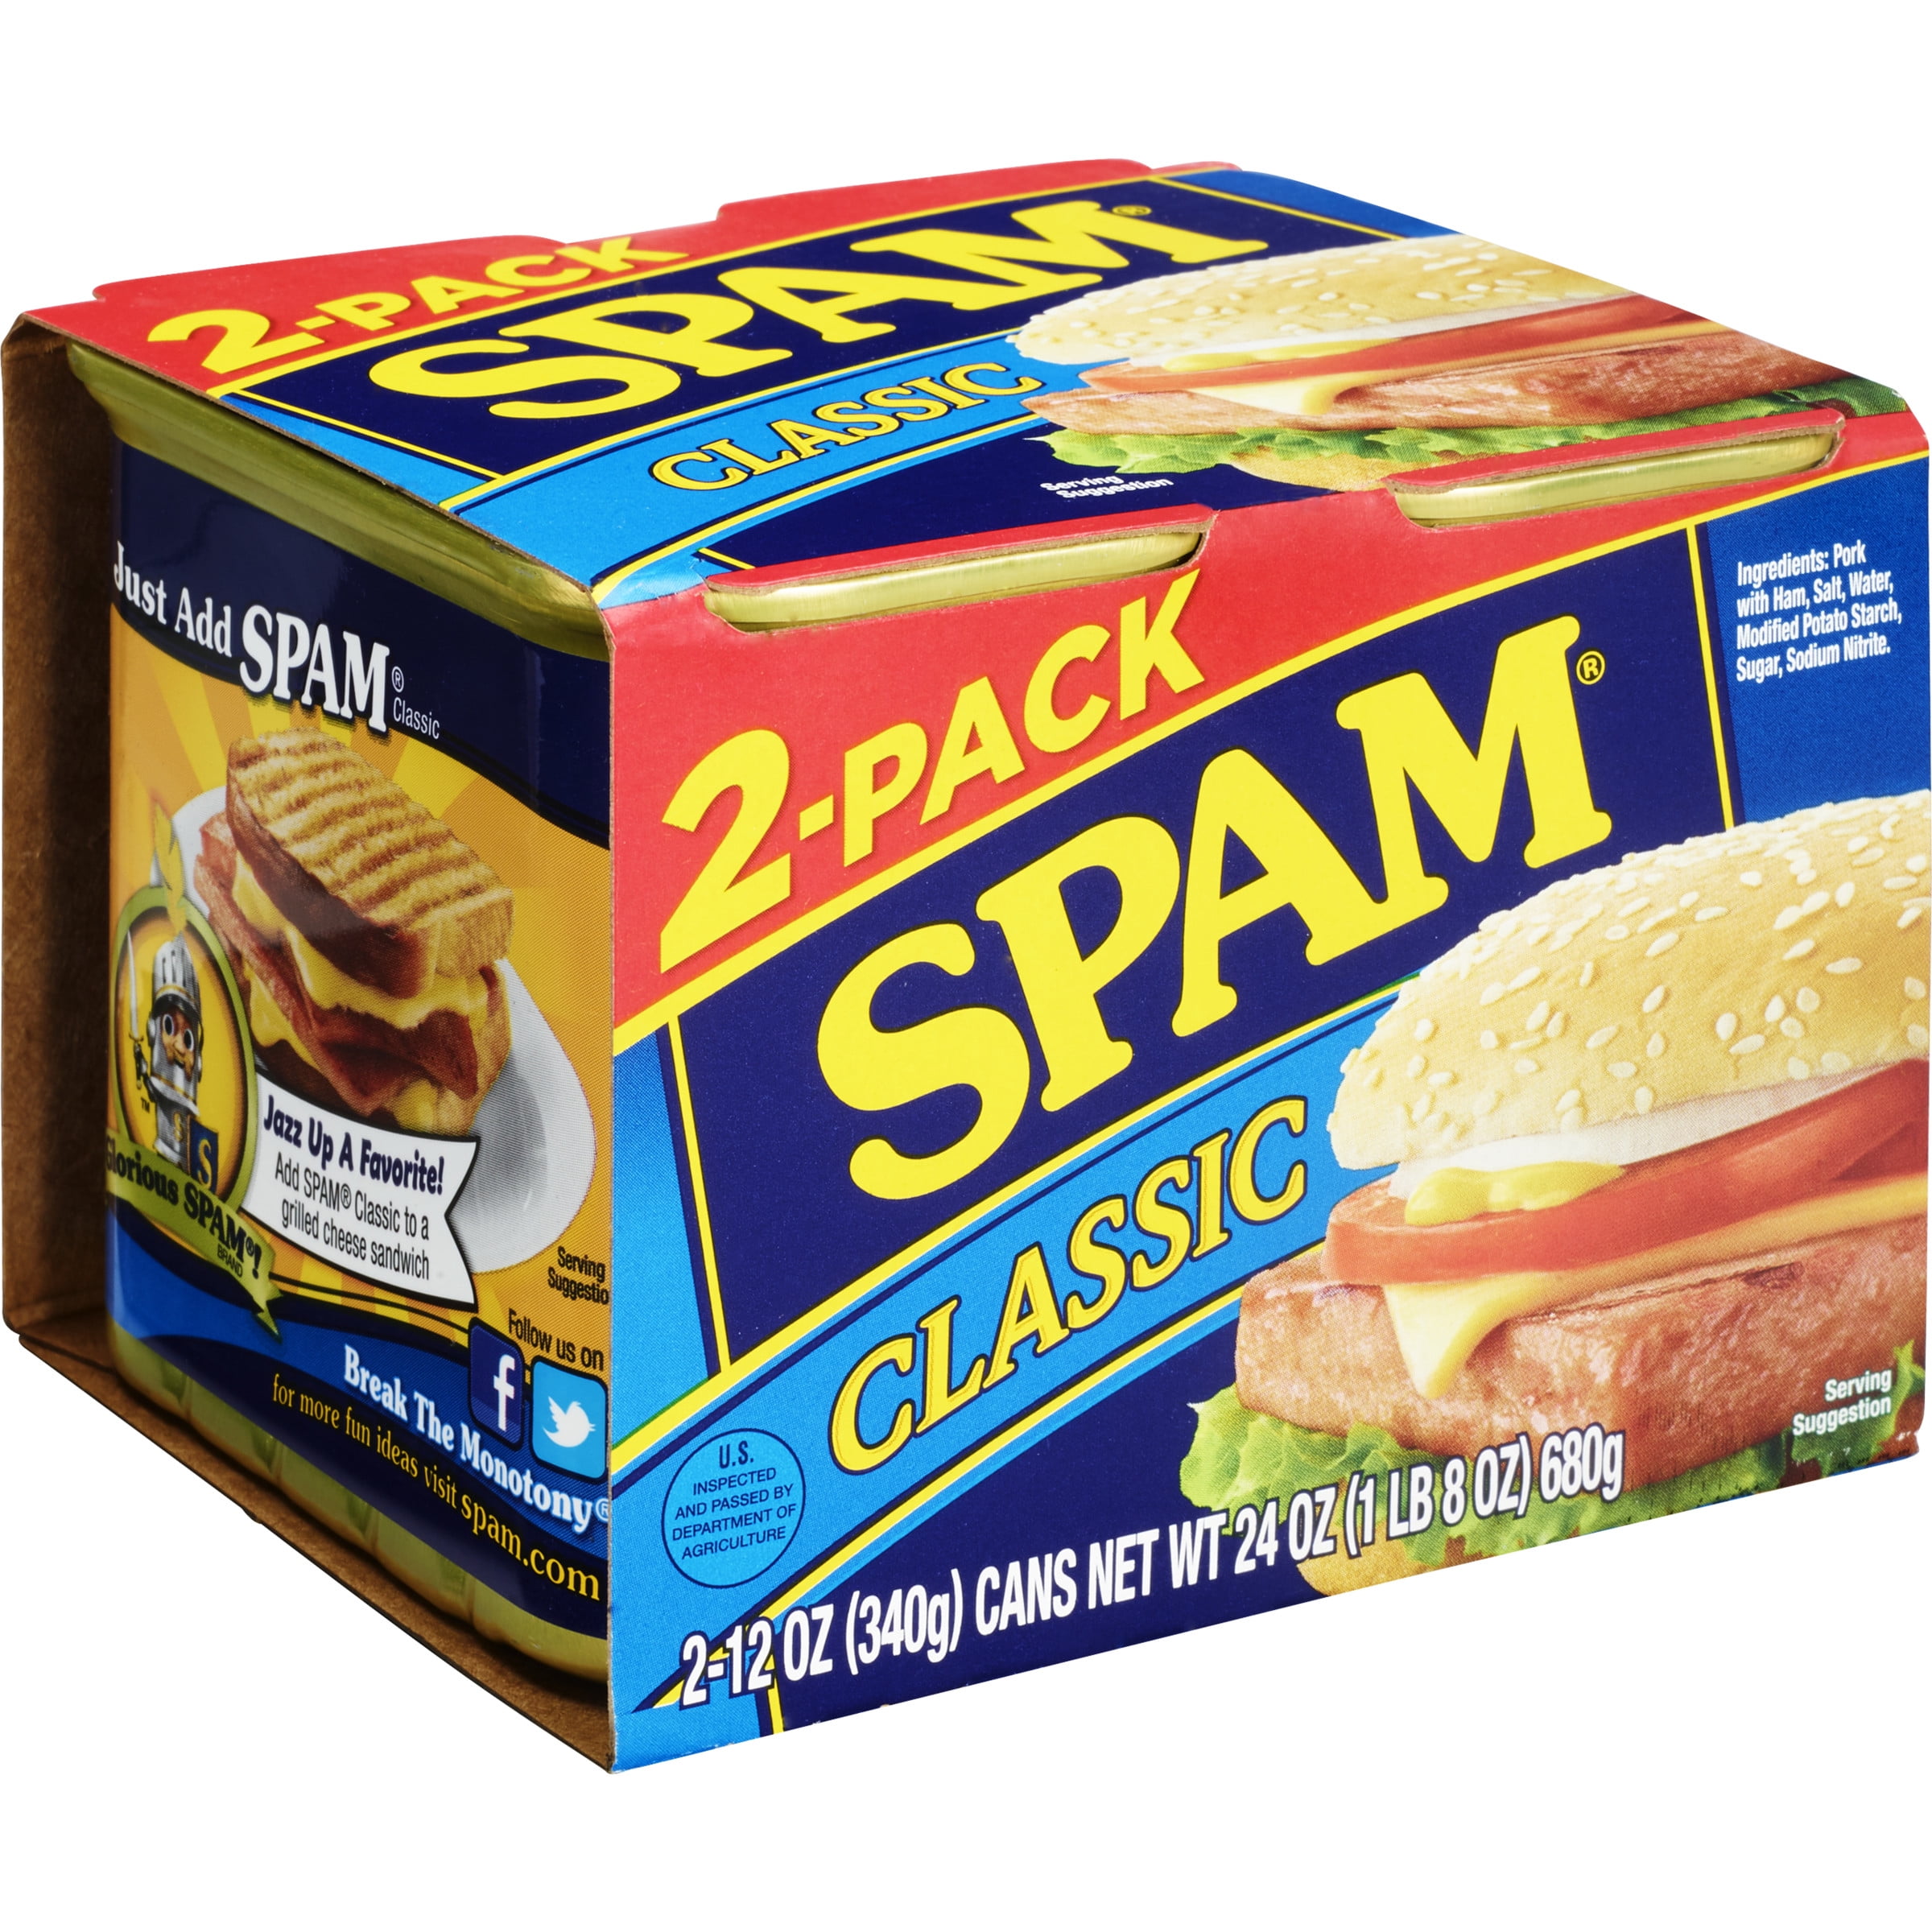 Spam Teriyaki, 2 Pack, 12 Ounce Cans, Luncheon Meat Can, Canned Meat, Spam  Musubi, Hormel Foods, Pantry, Fully Cooked Pork with Ham, Variety Pack